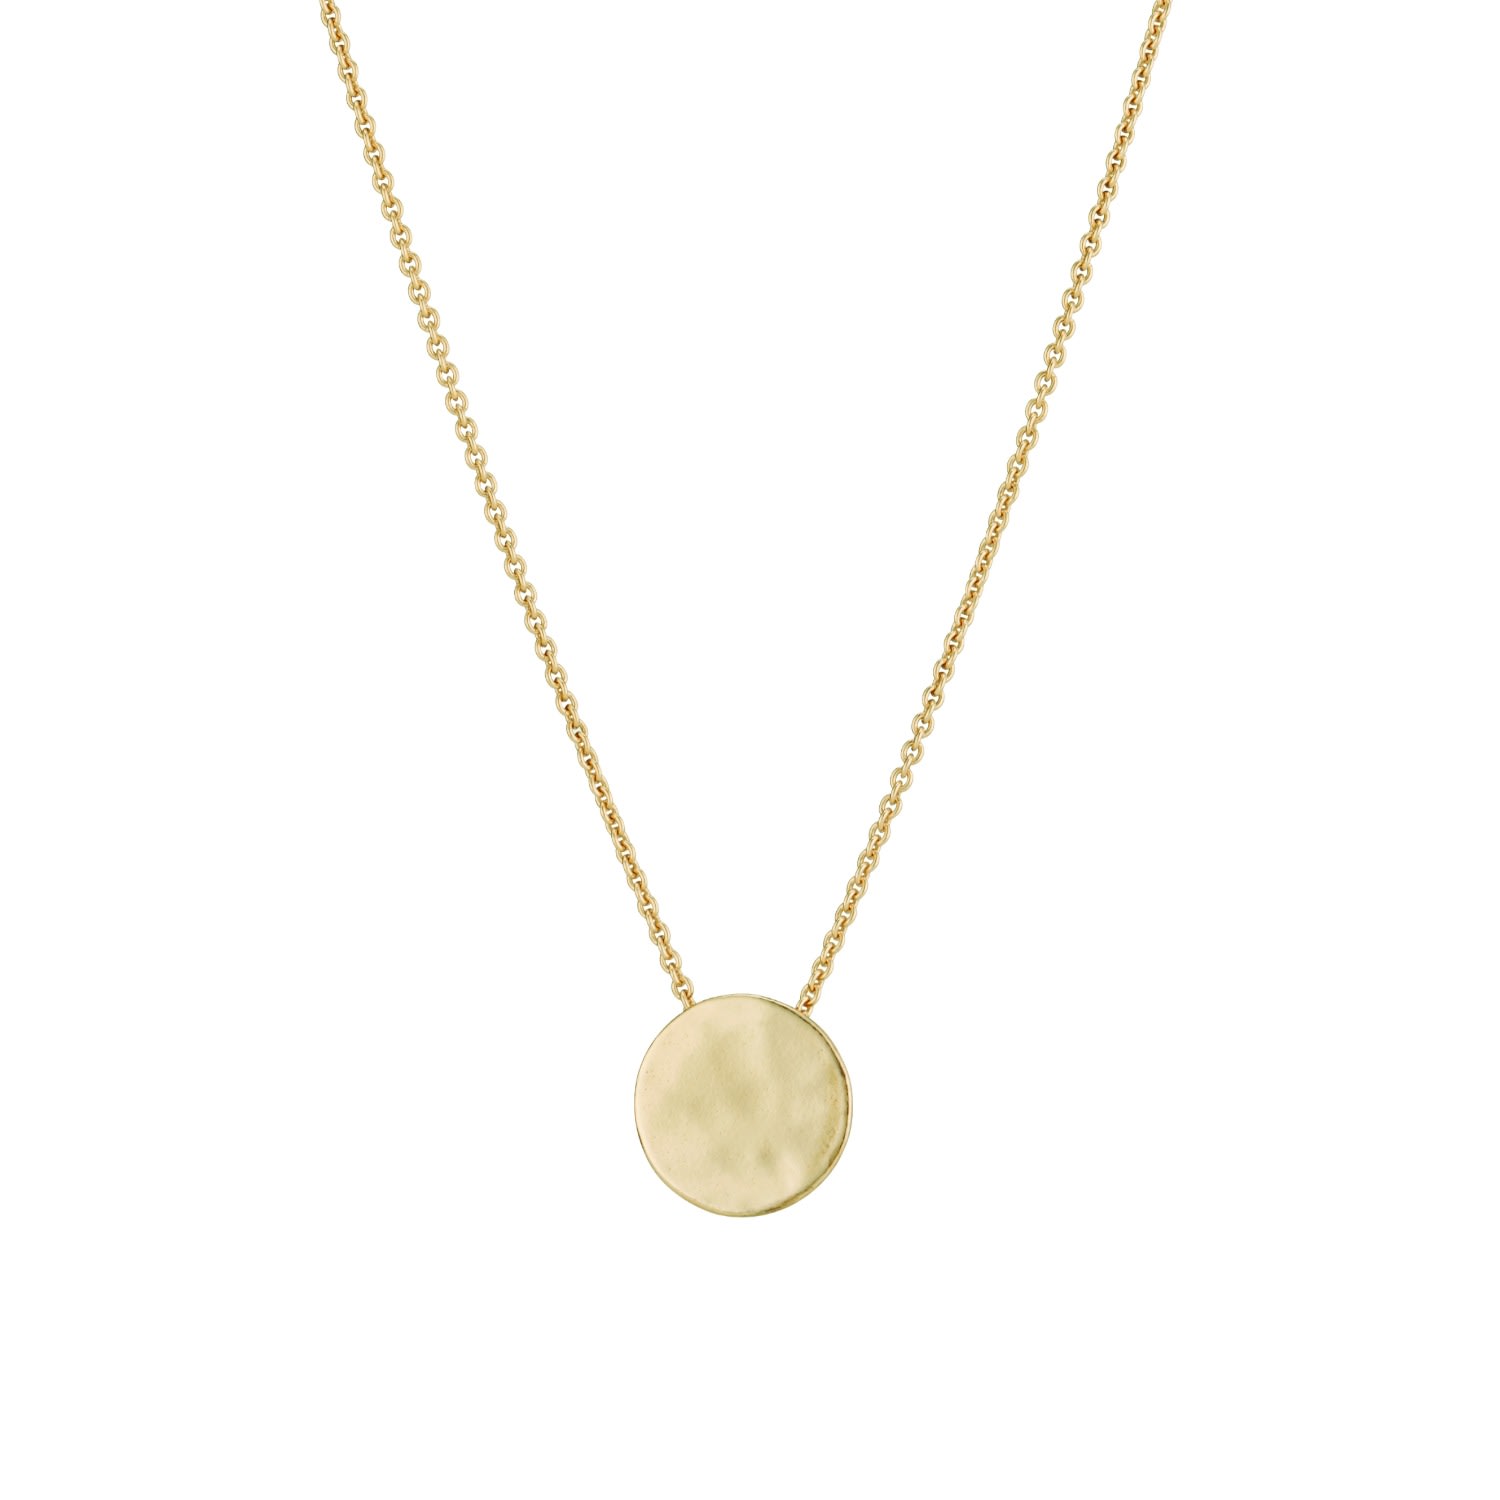 Women’s Yellow Gold Plated Medium Hammered Disc Necklace Posh Totty Designs